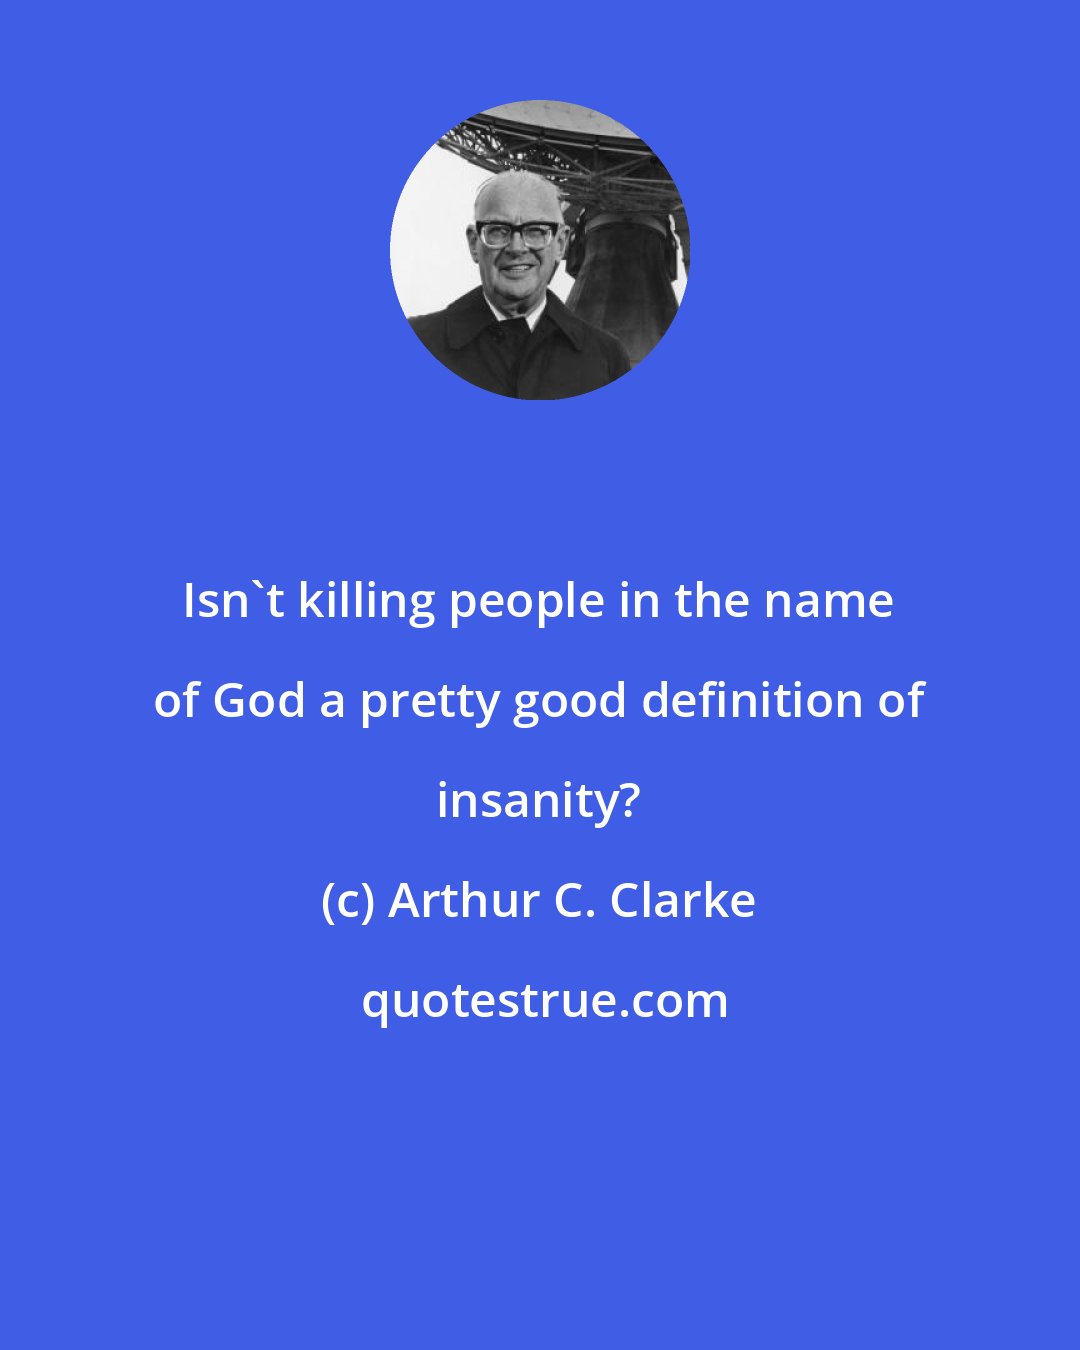 Arthur C. Clarke: Isn't killing people in the name of God a pretty good definition of insanity?